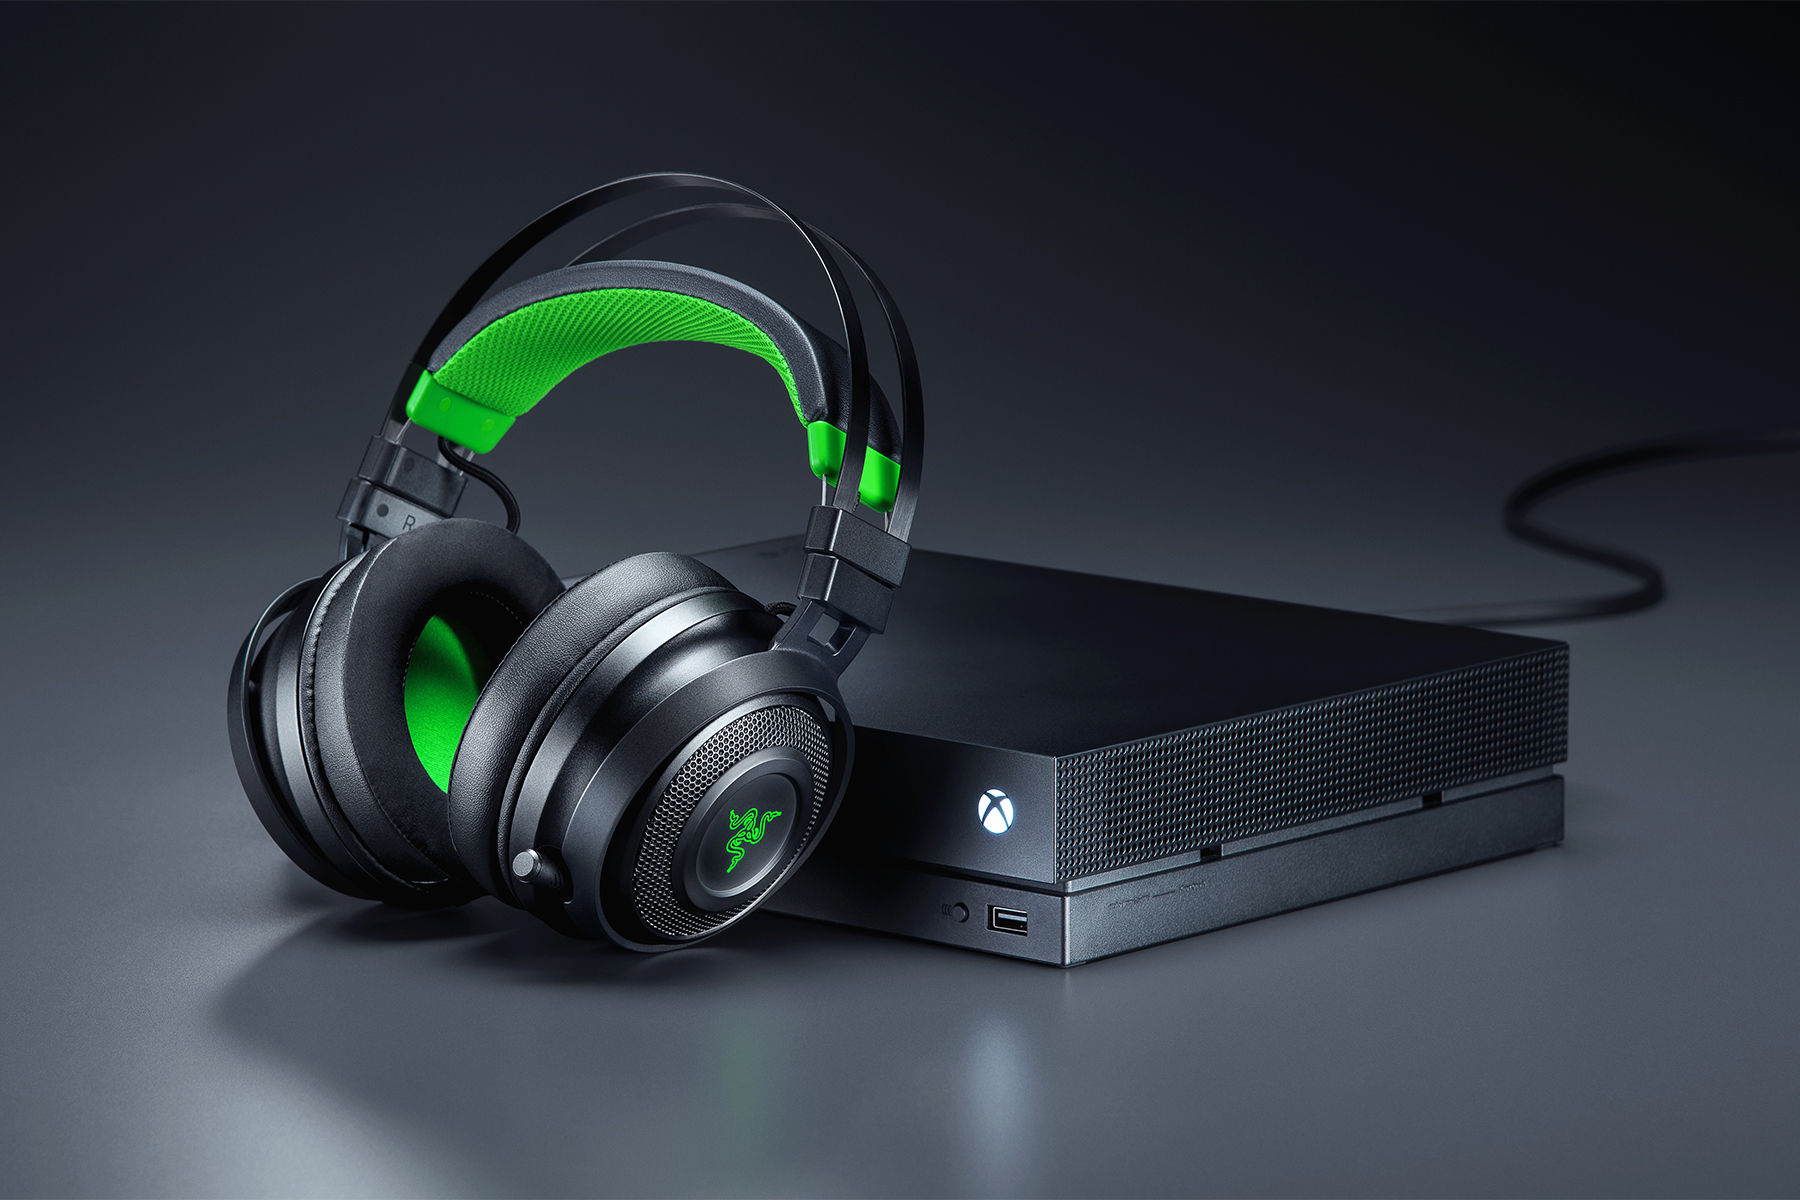 Razer Nari Ultimate is a vibreating headset for Xbox One